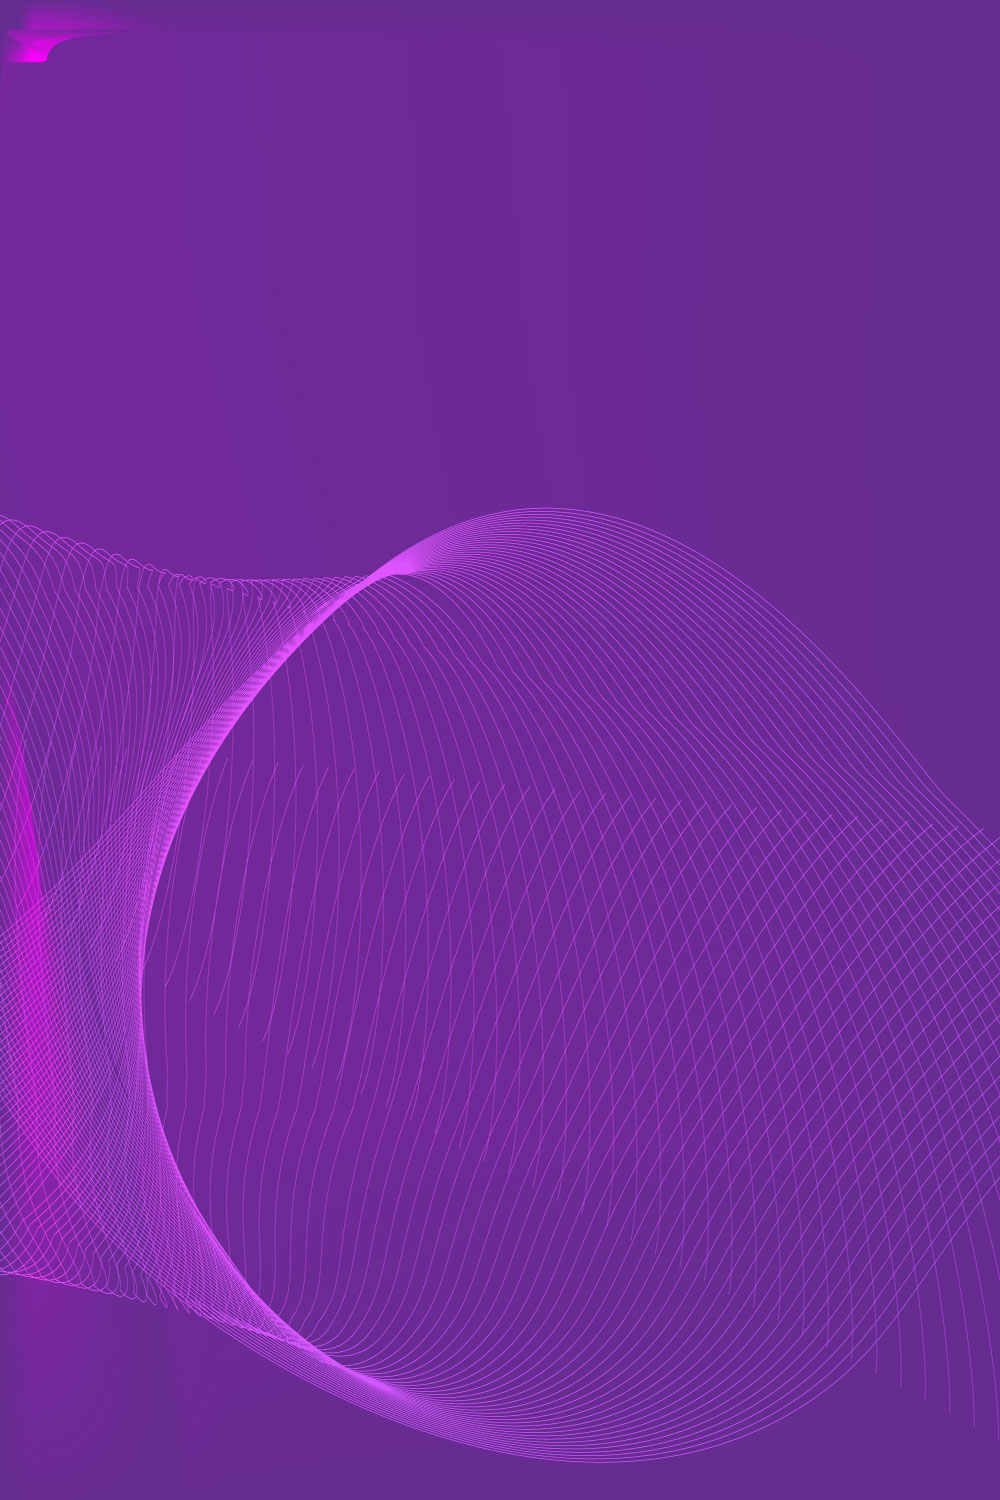 Gradient Background with violet mesh pinterest preview image.